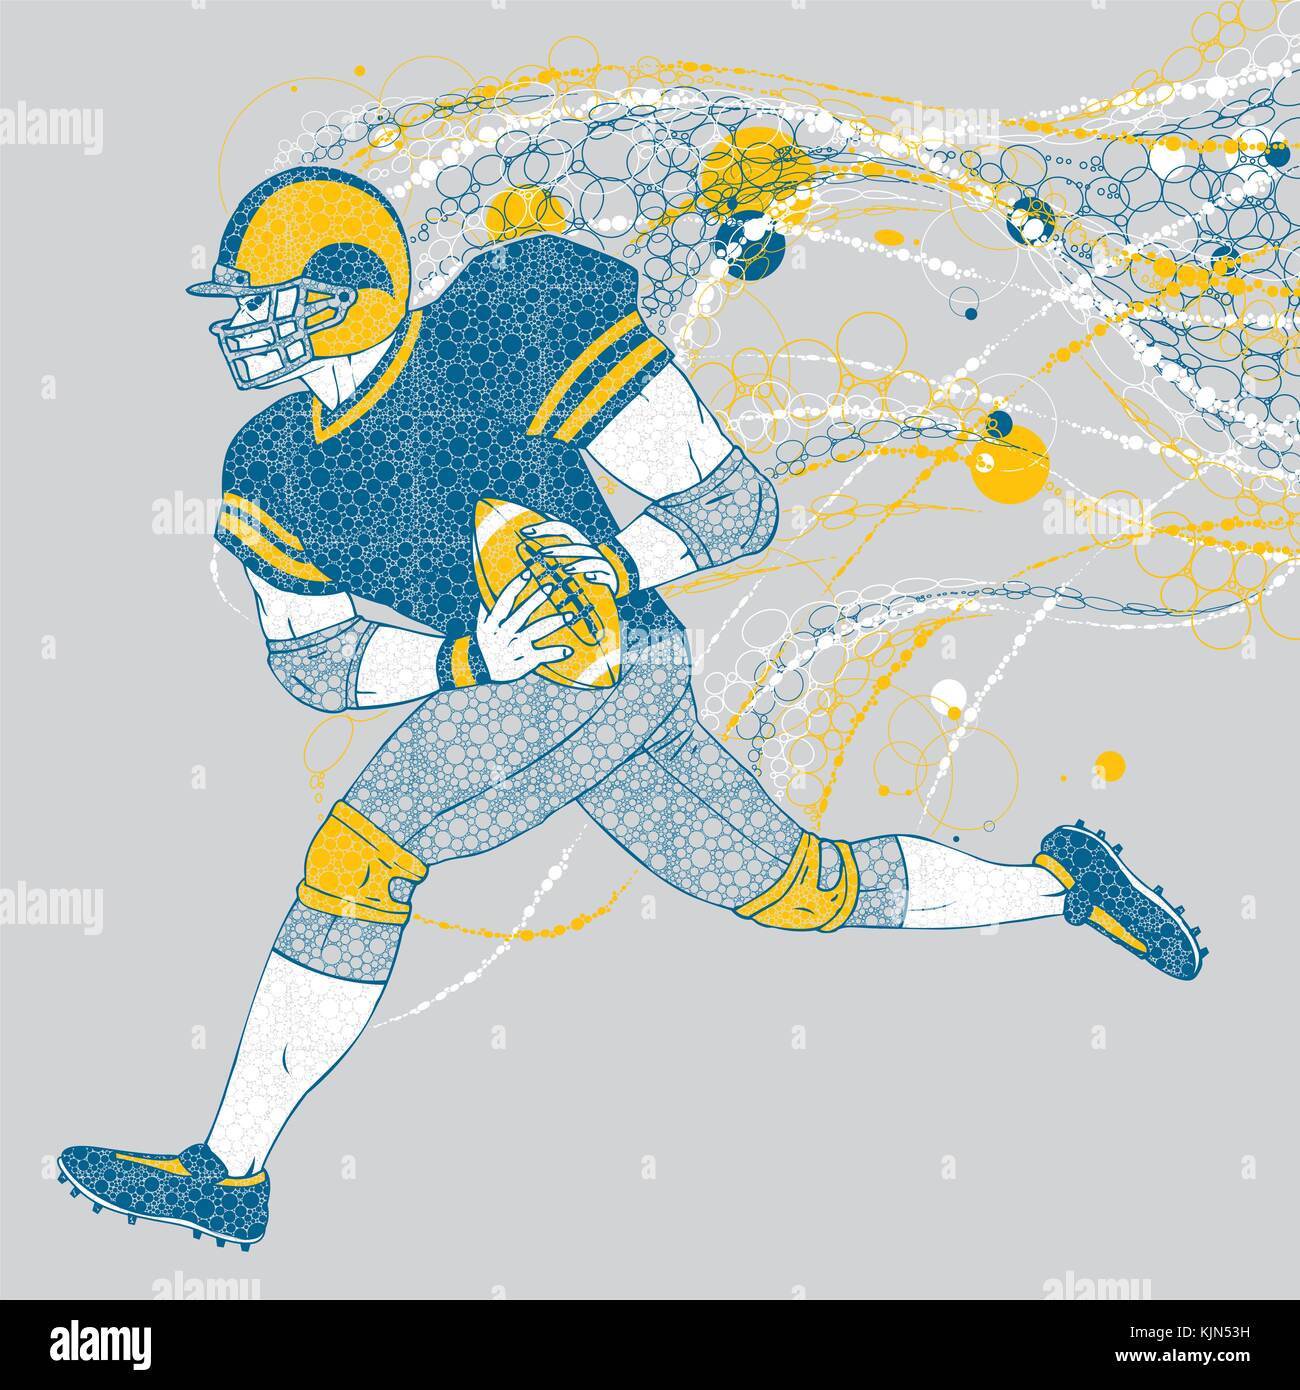 American football player with graphic trails Stock Vector